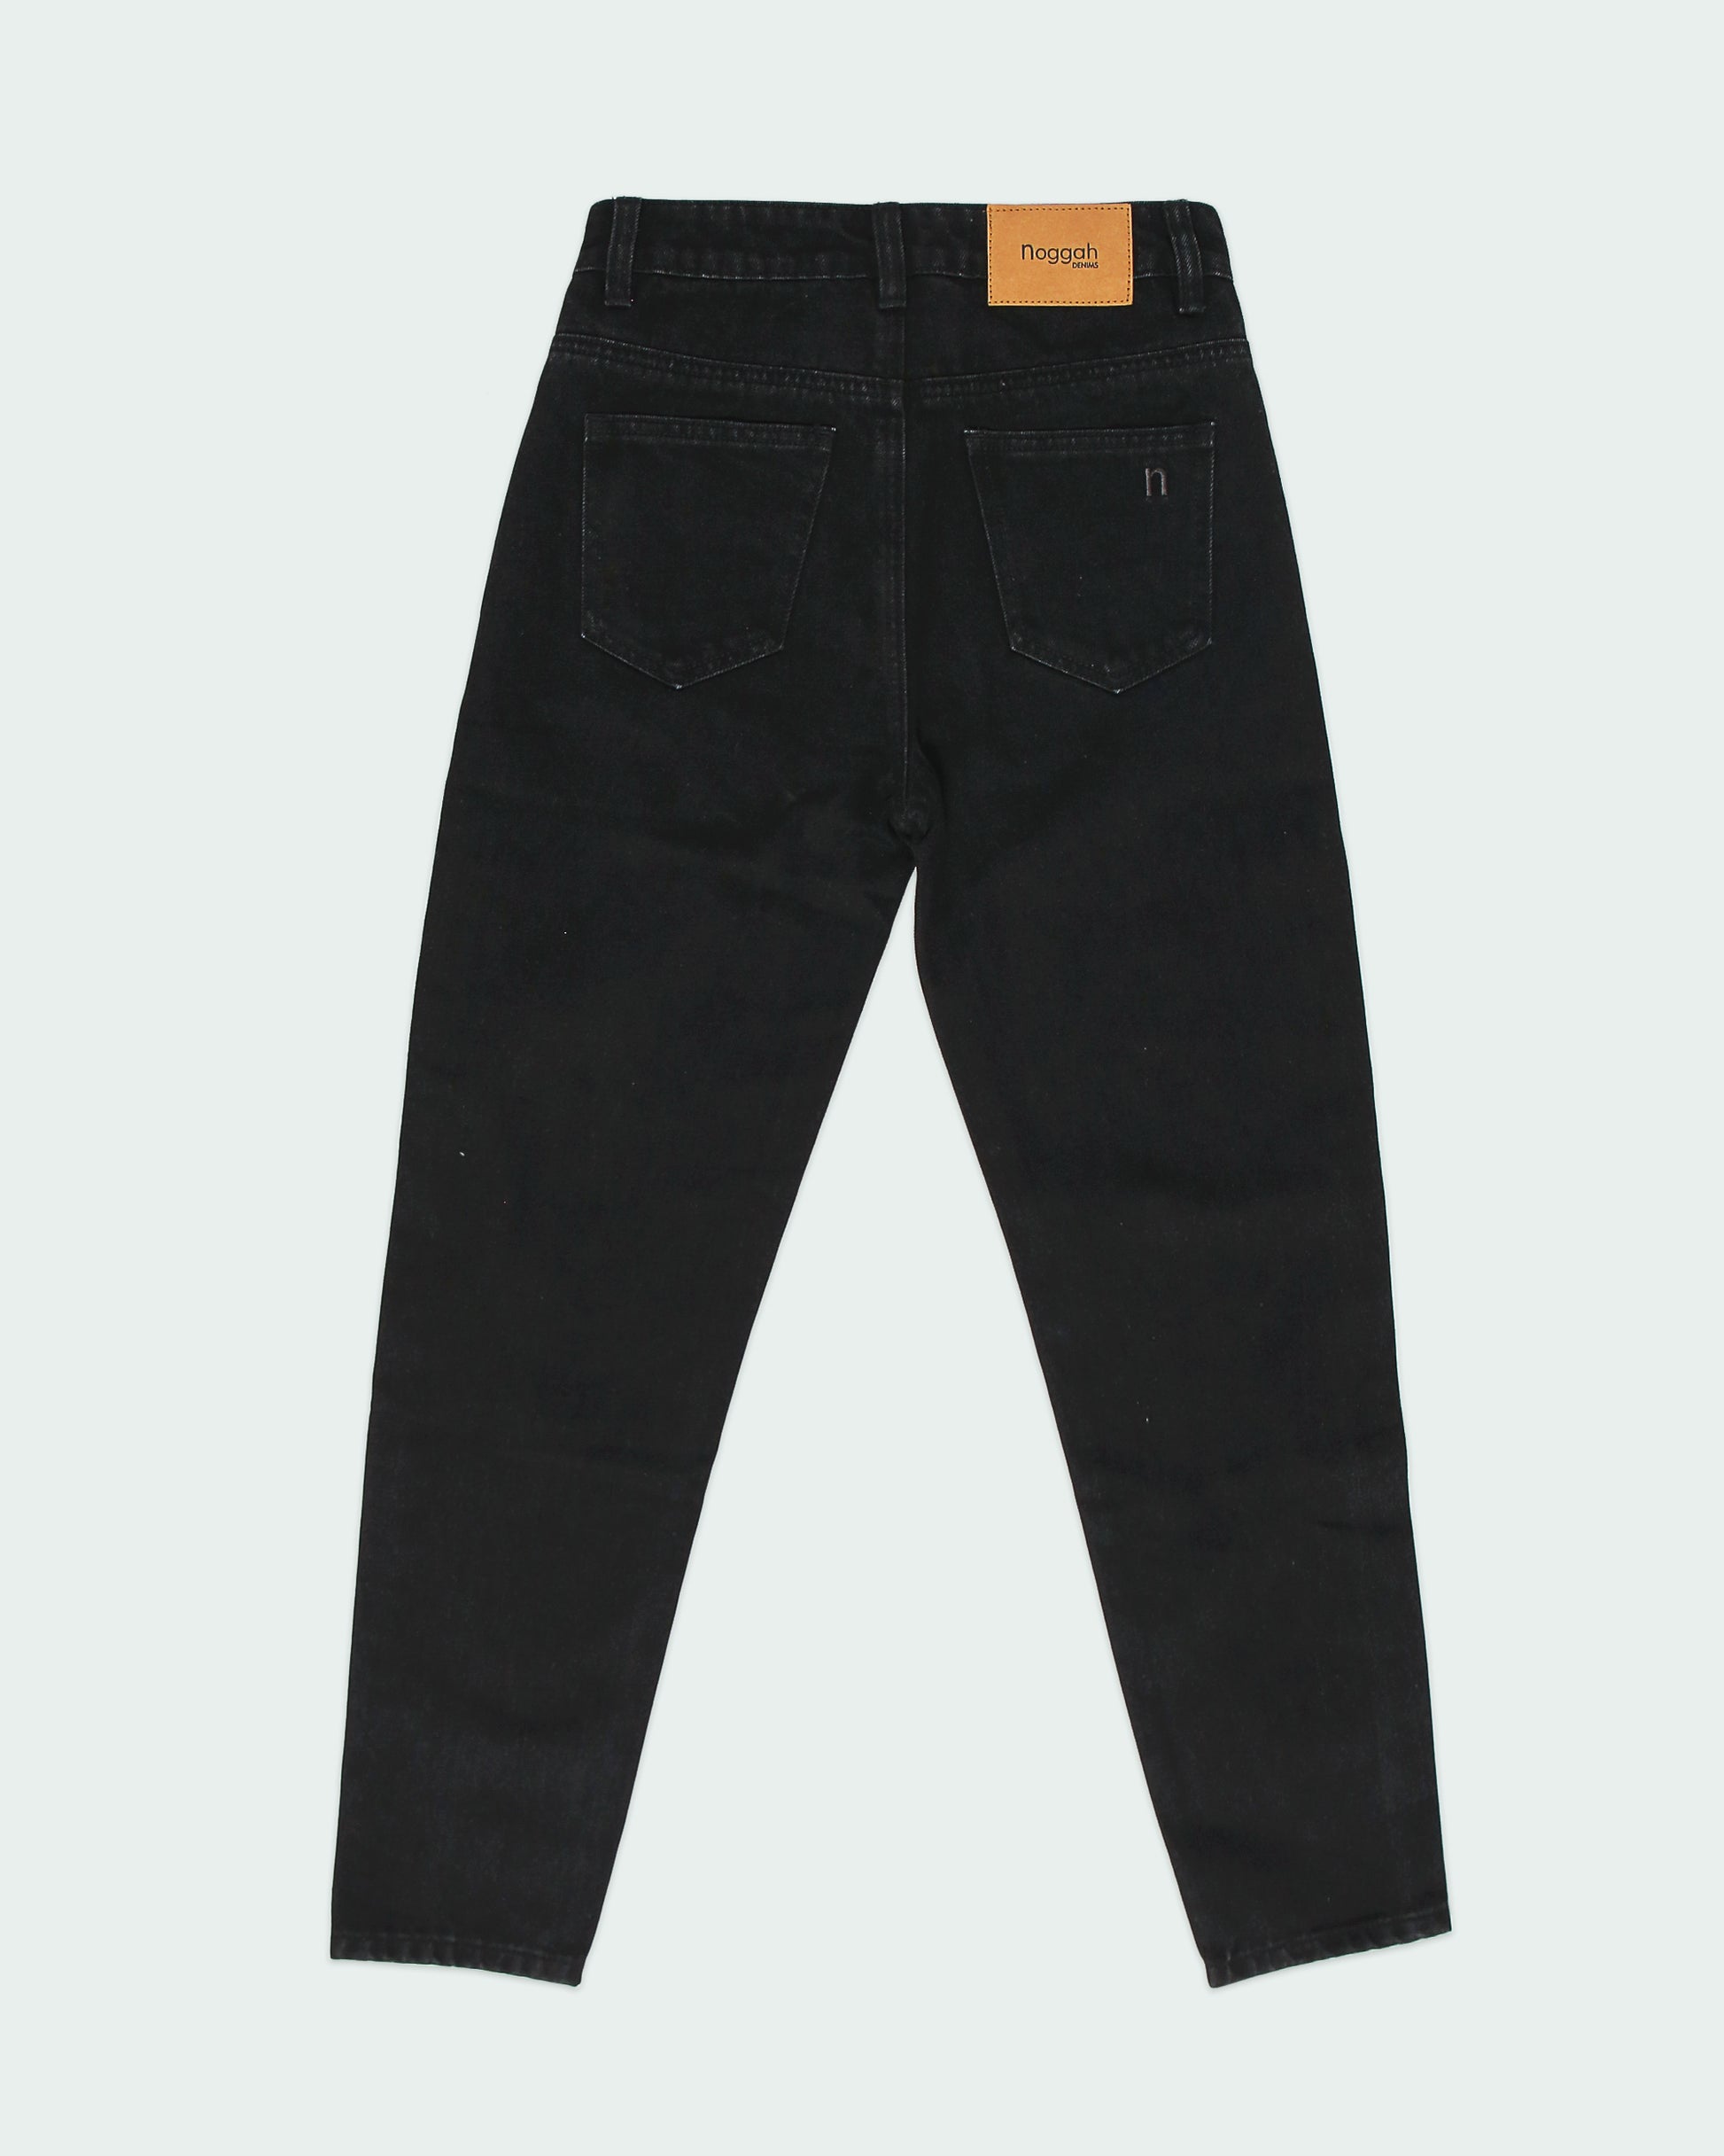 Wd012 Black Relaxed Fit Jeans – Noggah Denims